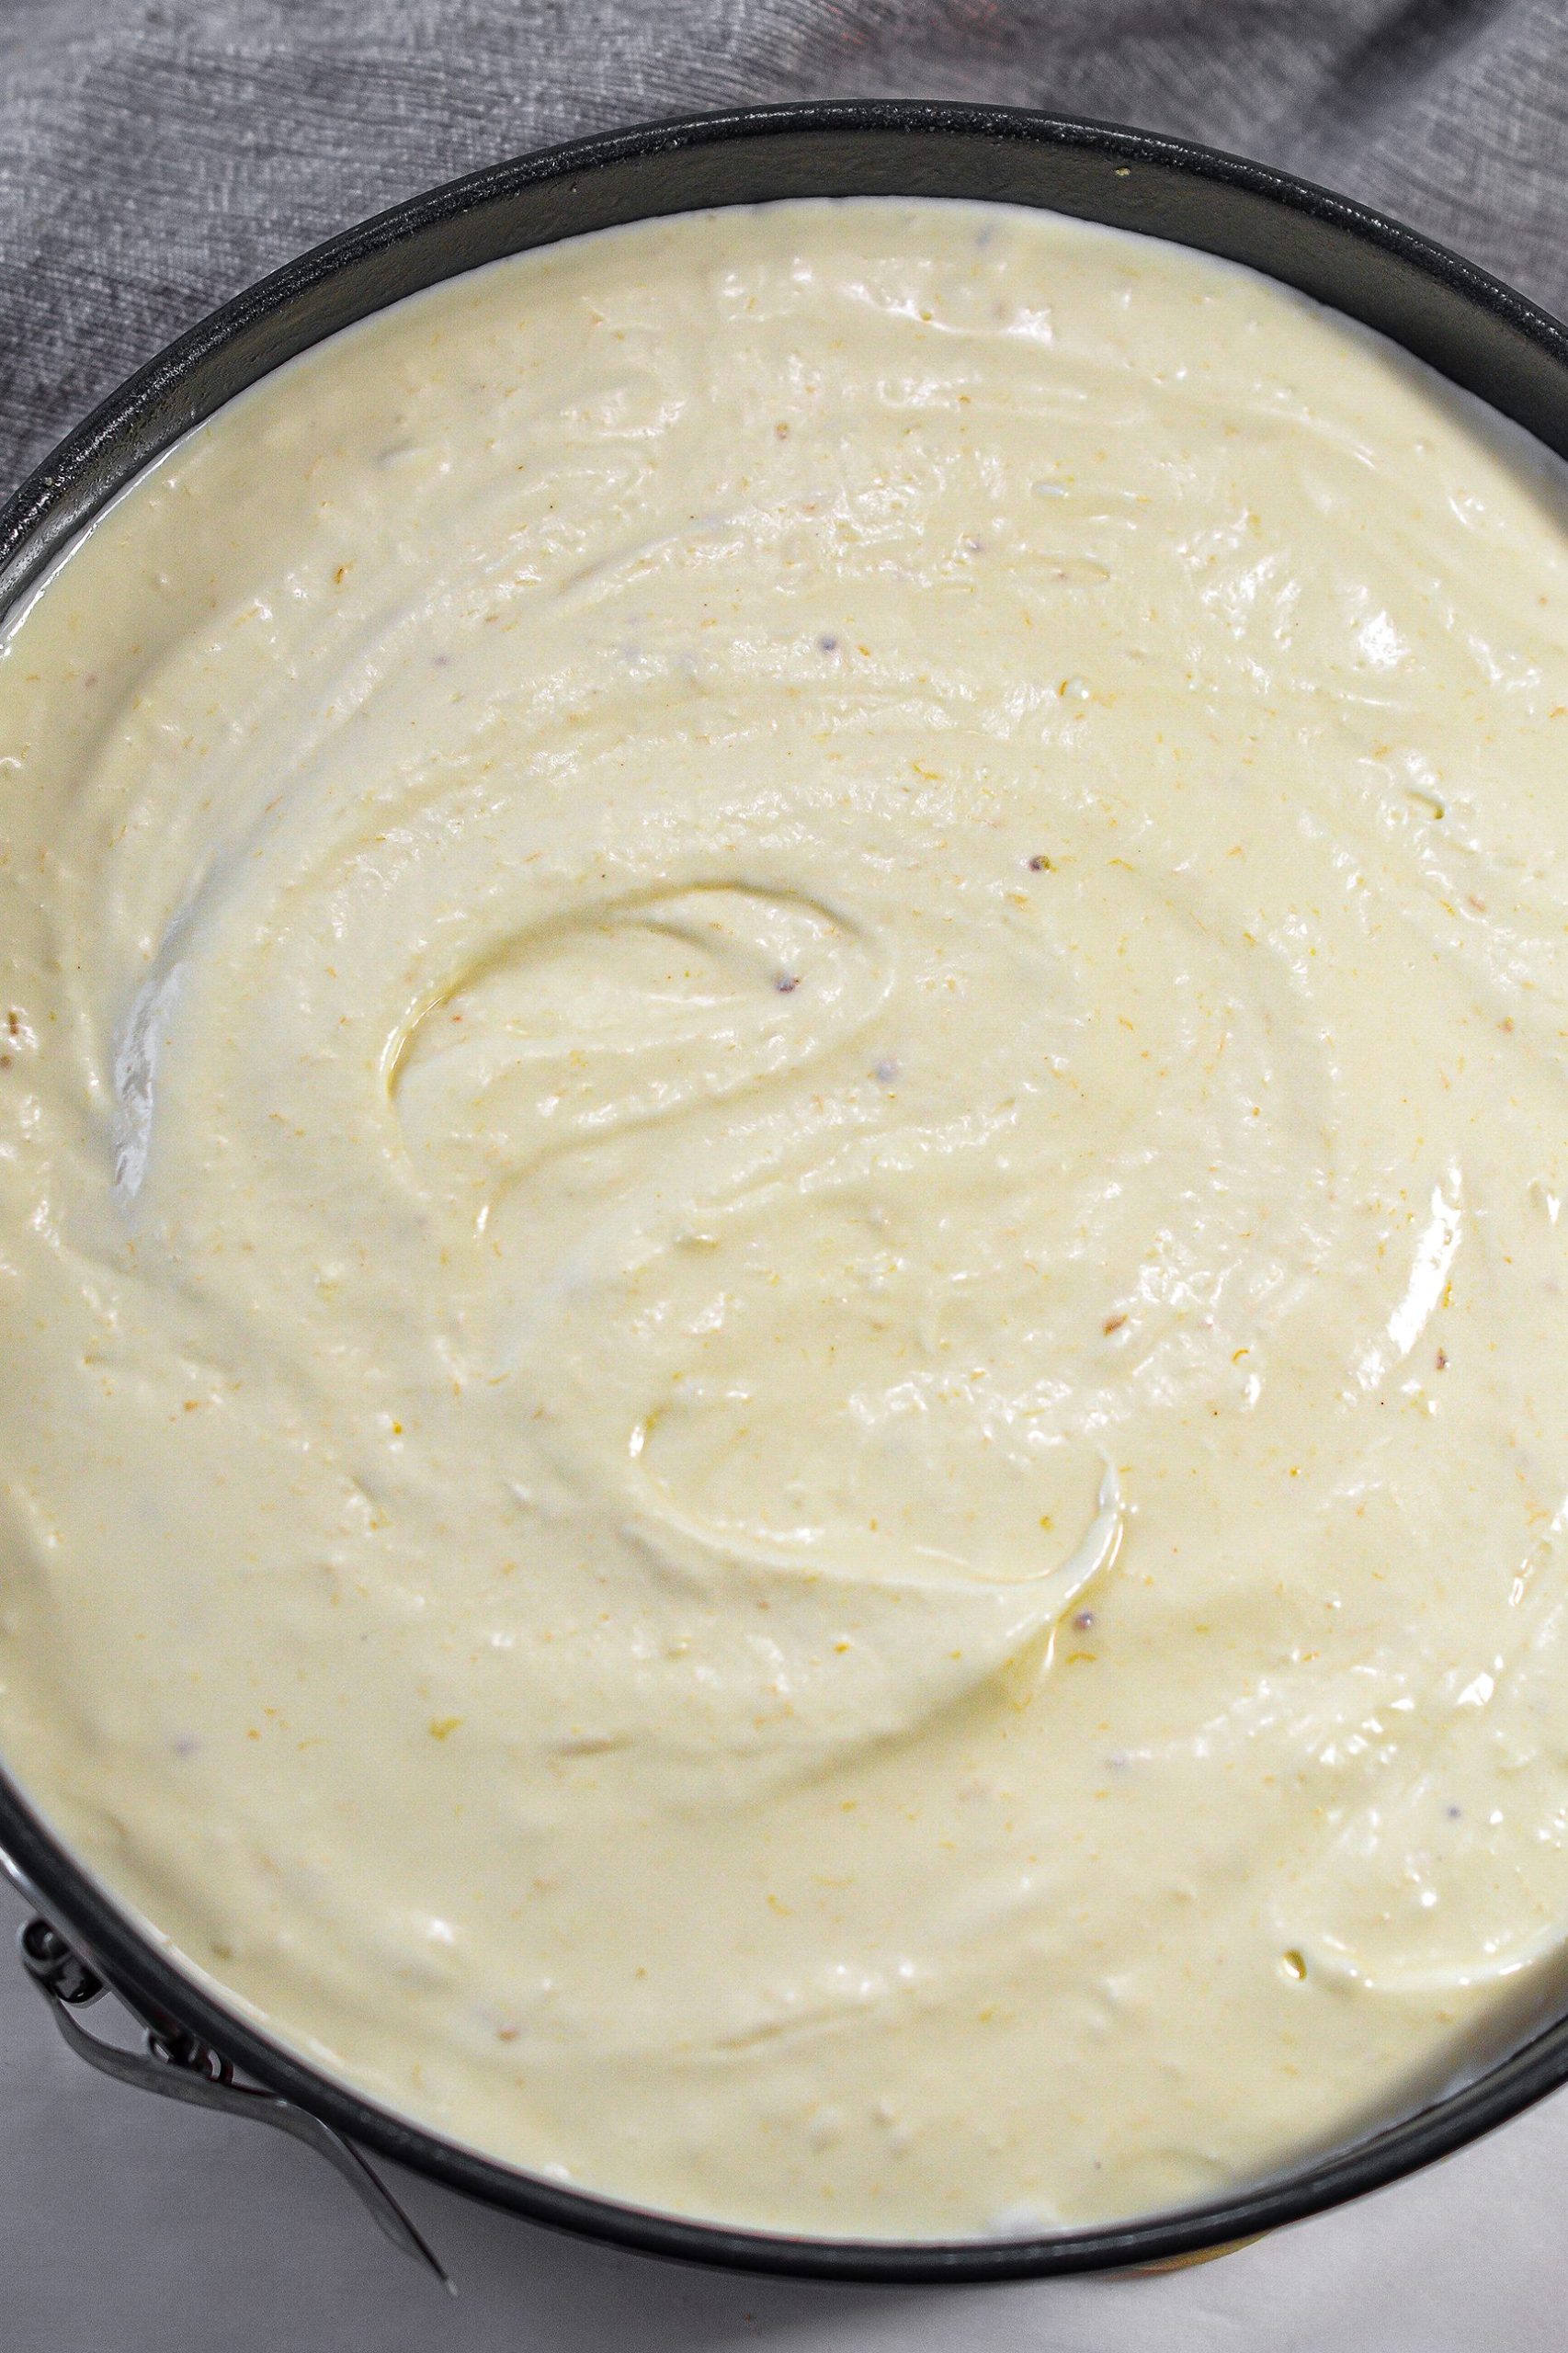 Remove the cheesecake from the oven and let cool on the counter for 30 minutes.